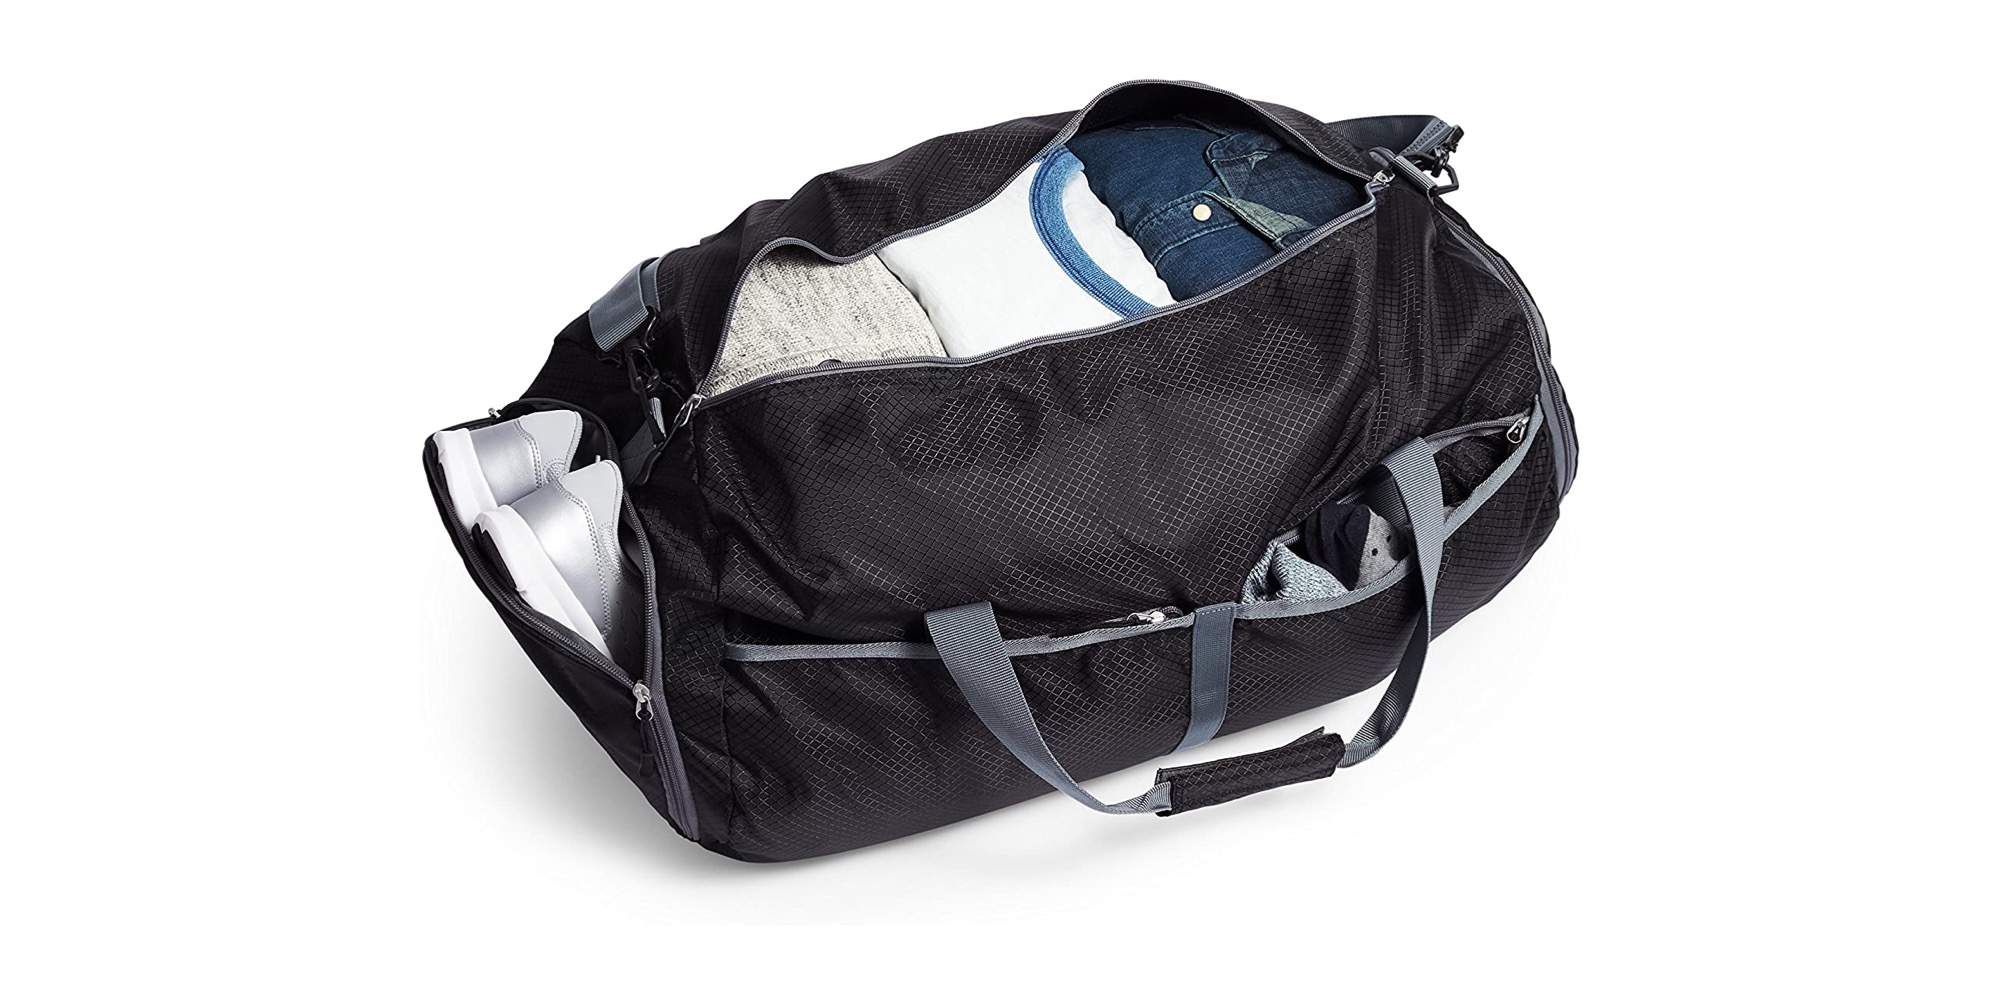 At $16.50, it's hard to go wrong with Amazon's Packable Duffel Bag (New ...